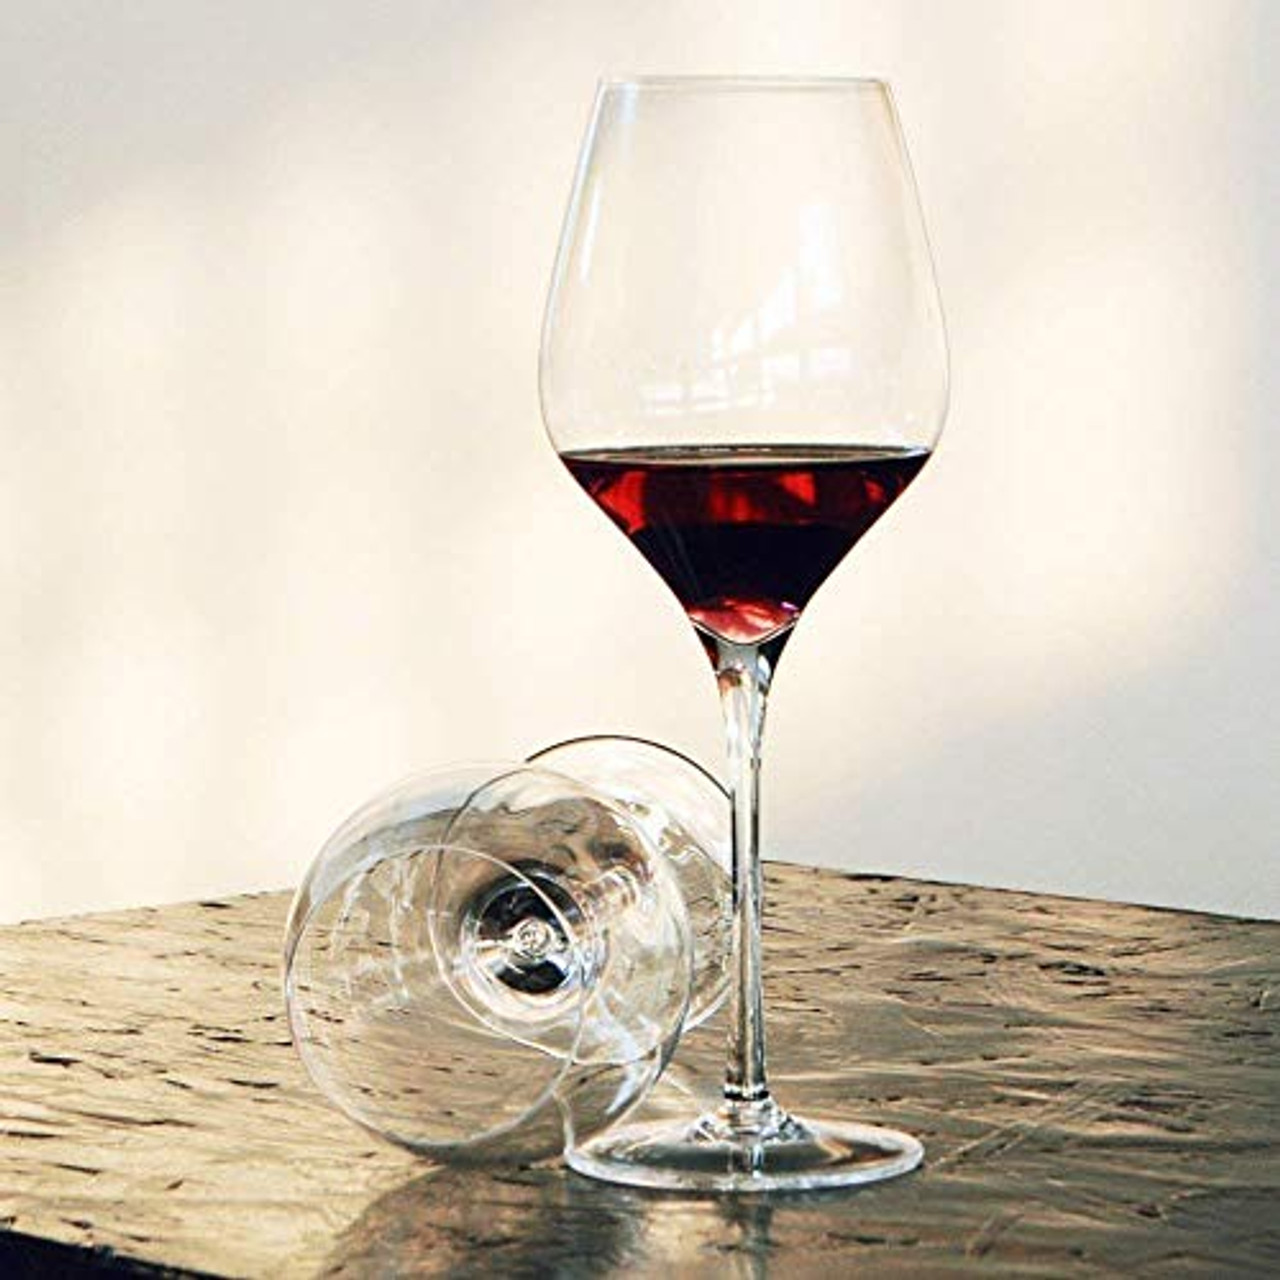 Wine glass, crystal clear glass goblet